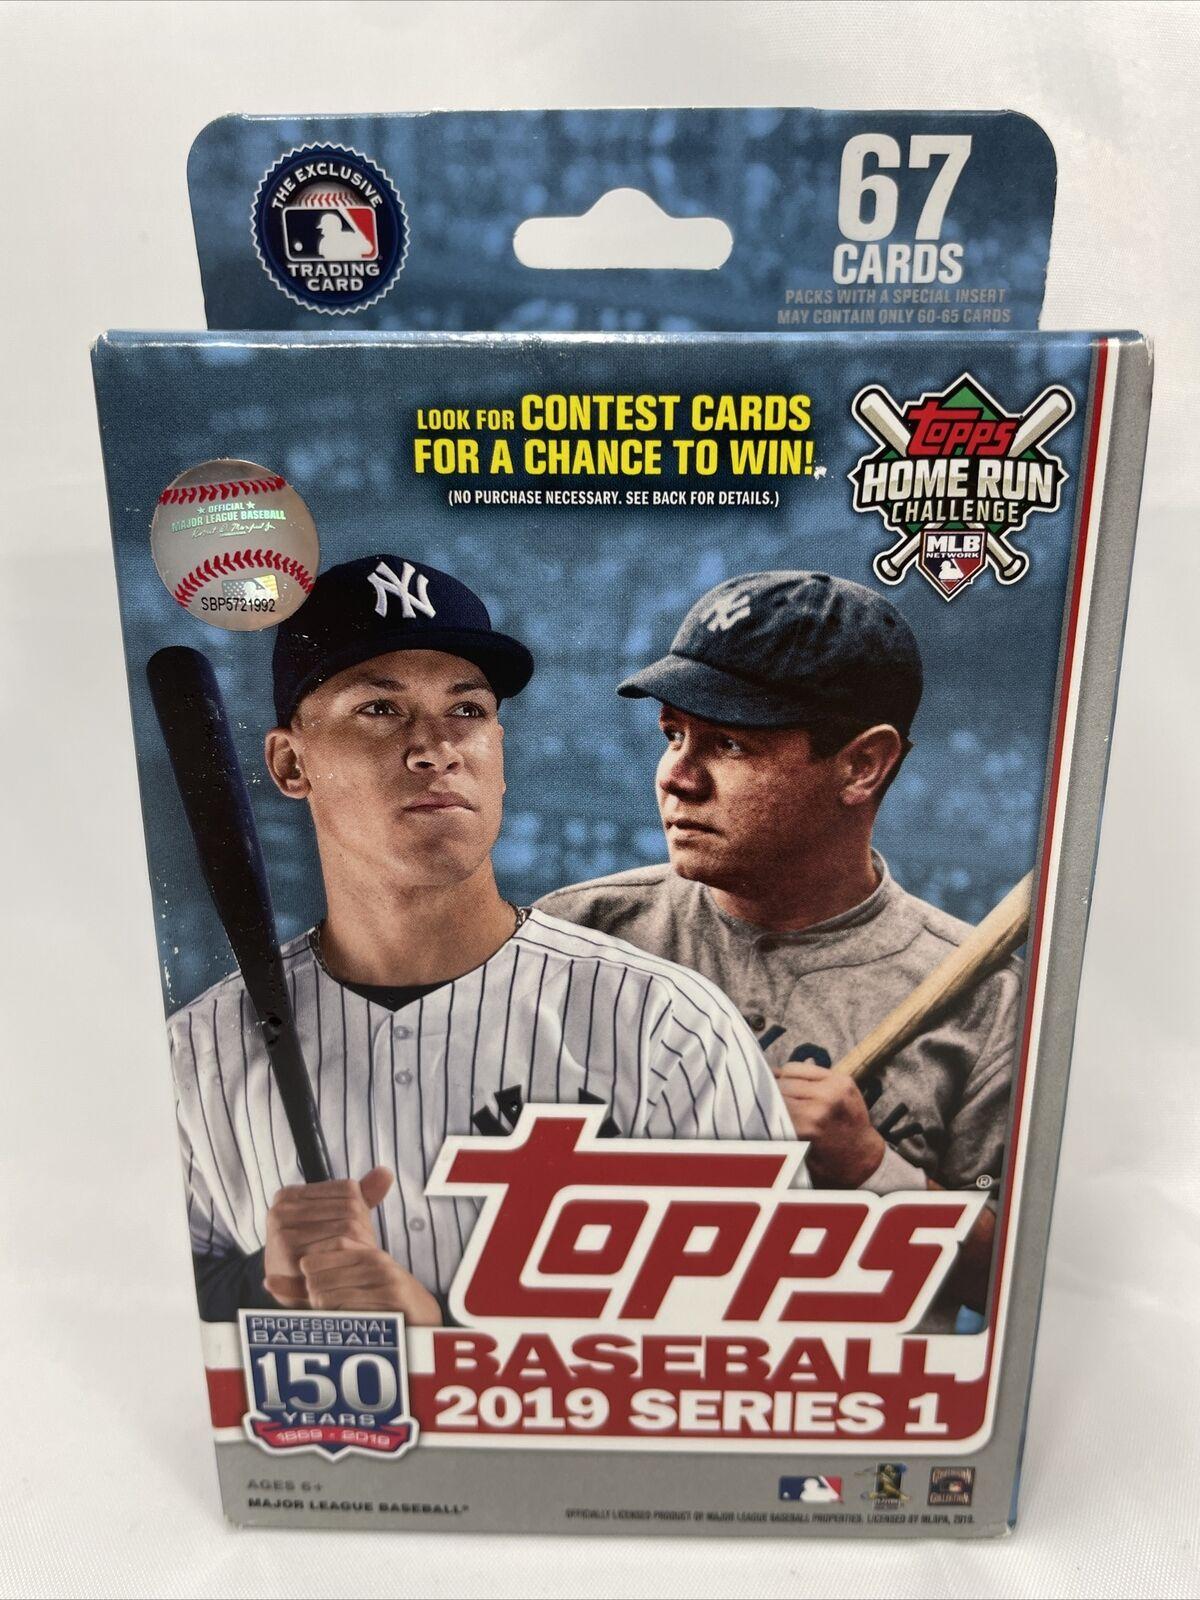 Trading Card Series Giveaway No. 4